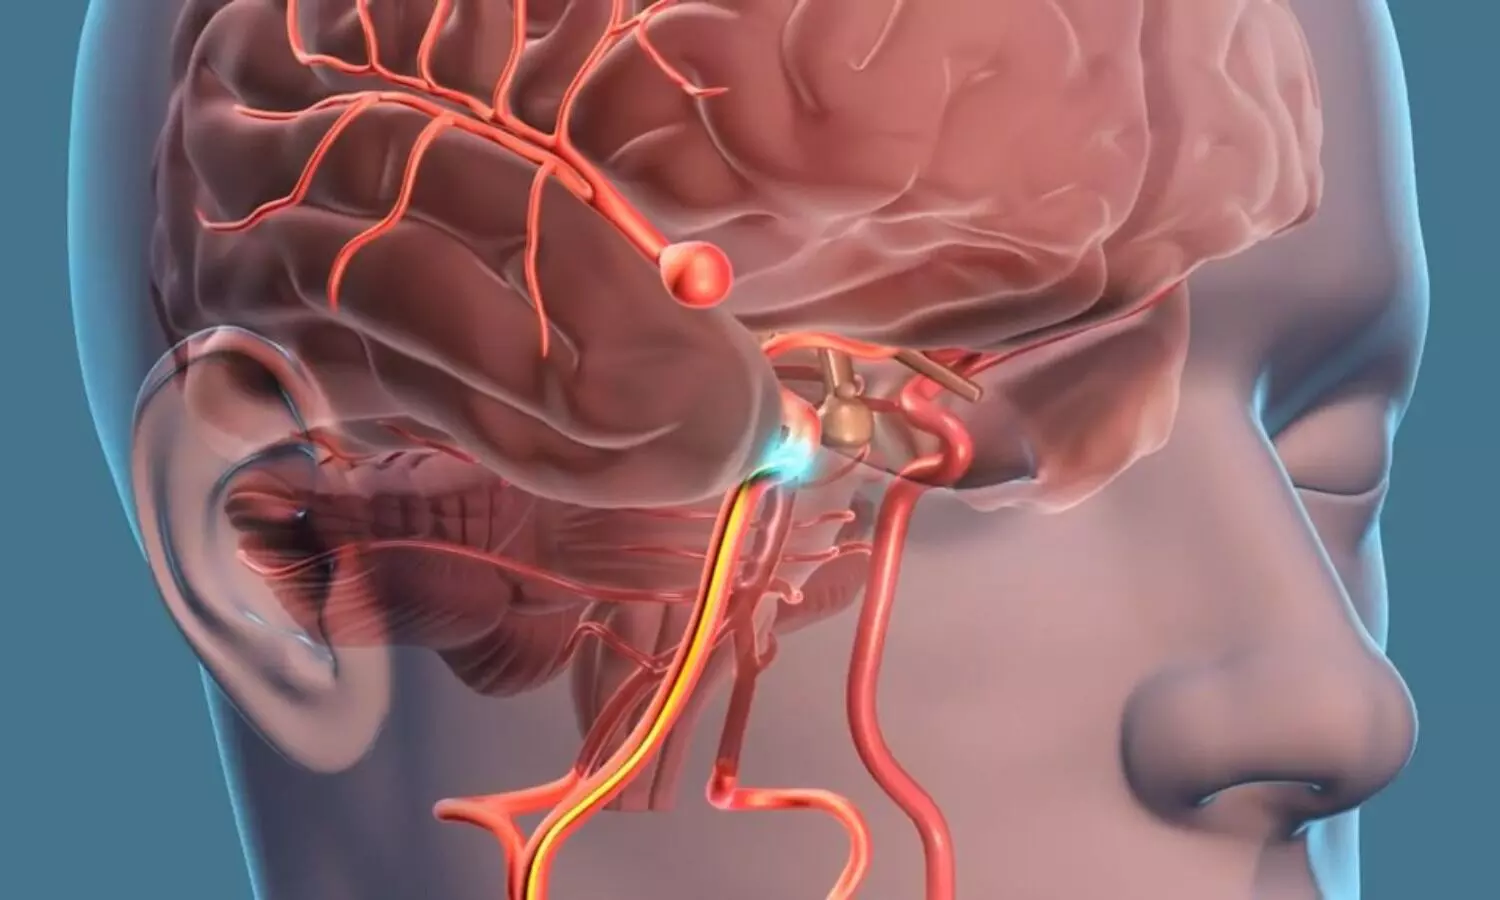 1 out of 25  patients of Intracranial Aneurysm Growth have rupture with in one year: JAMA